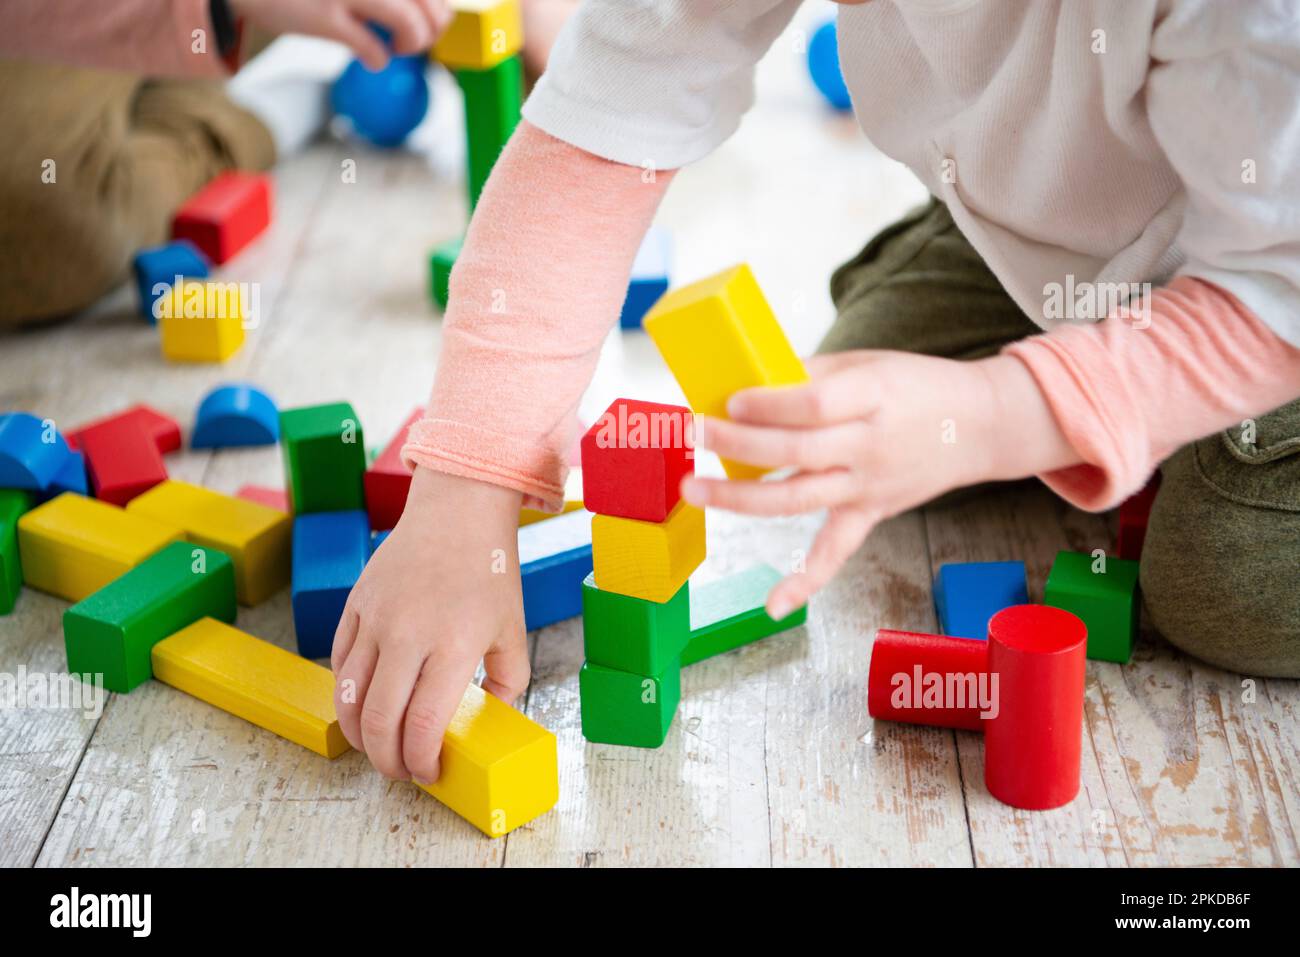 Children playing with building blocks Stock Photo